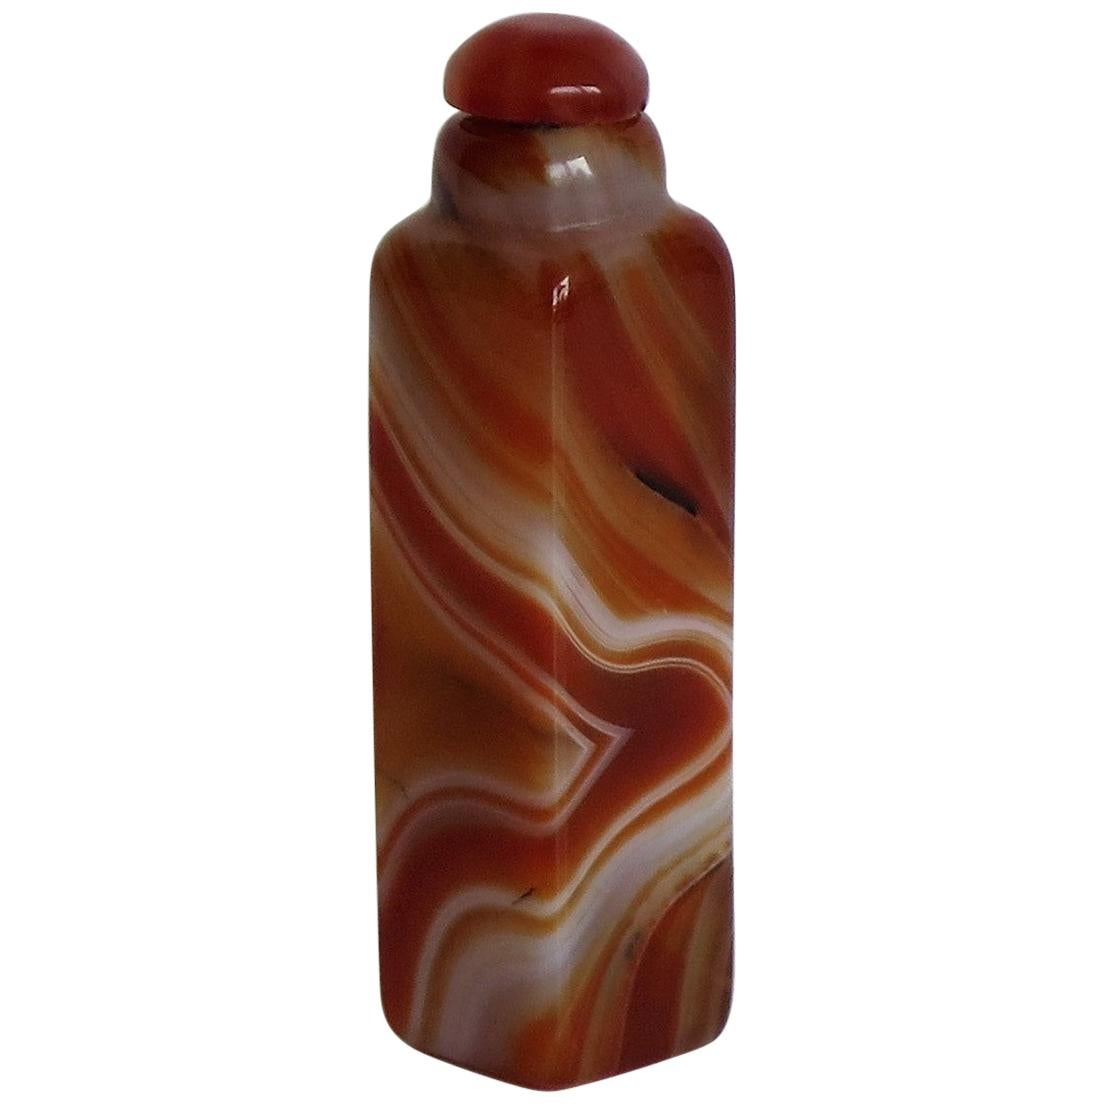 Chinese Natural Agate Stone Snuff Bottle Beautiful Striking Colors, circa 1930